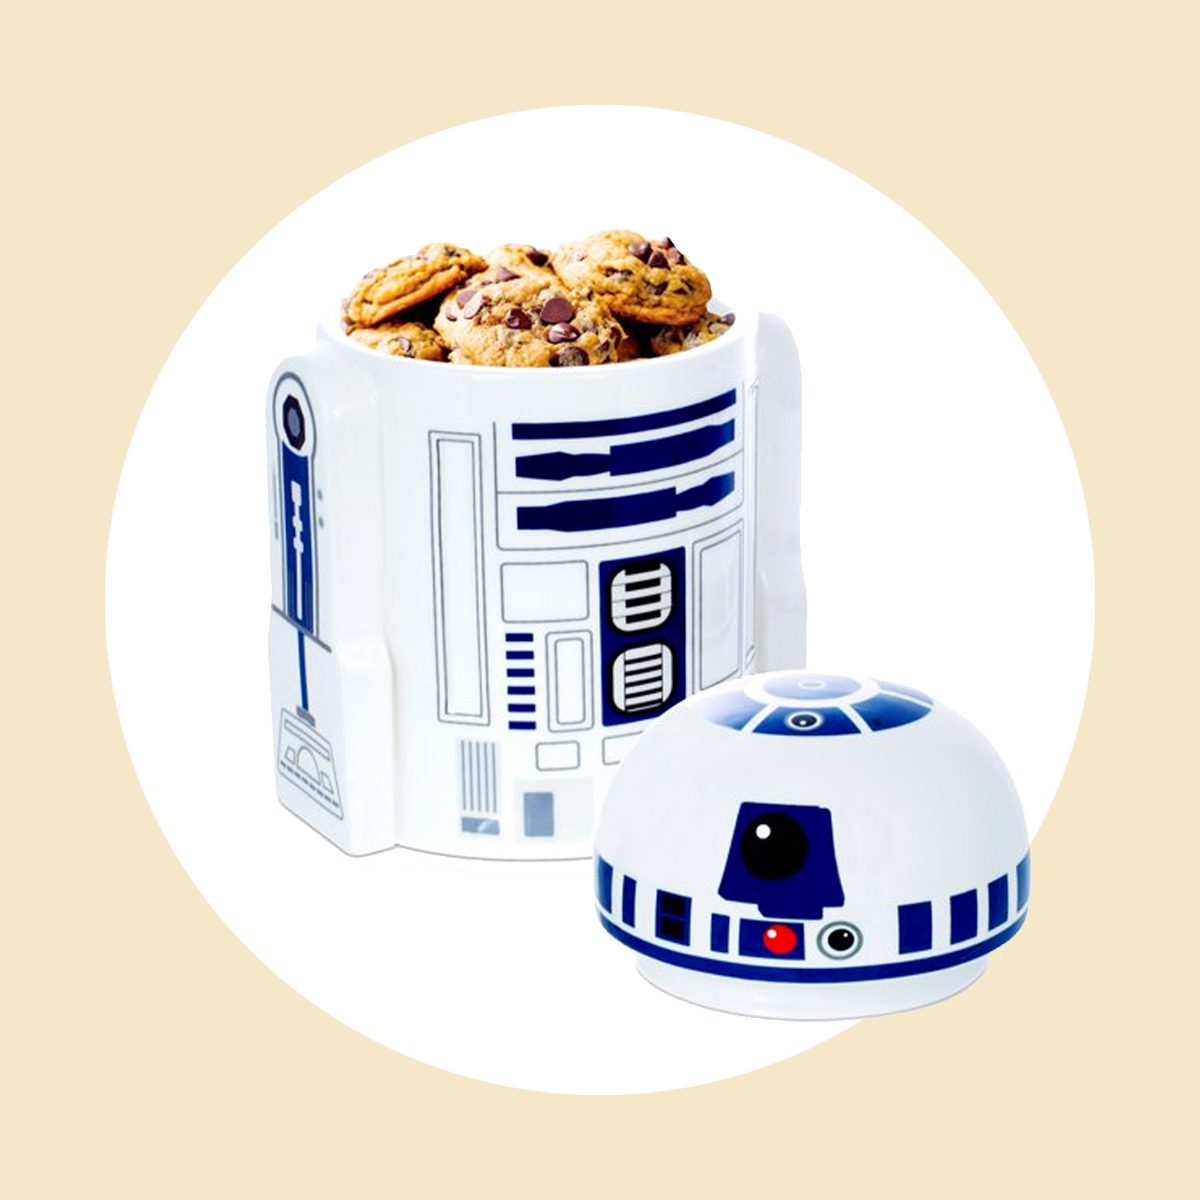 Gifts for Foodie Star Wars Fans - 4 Hats and Frugal